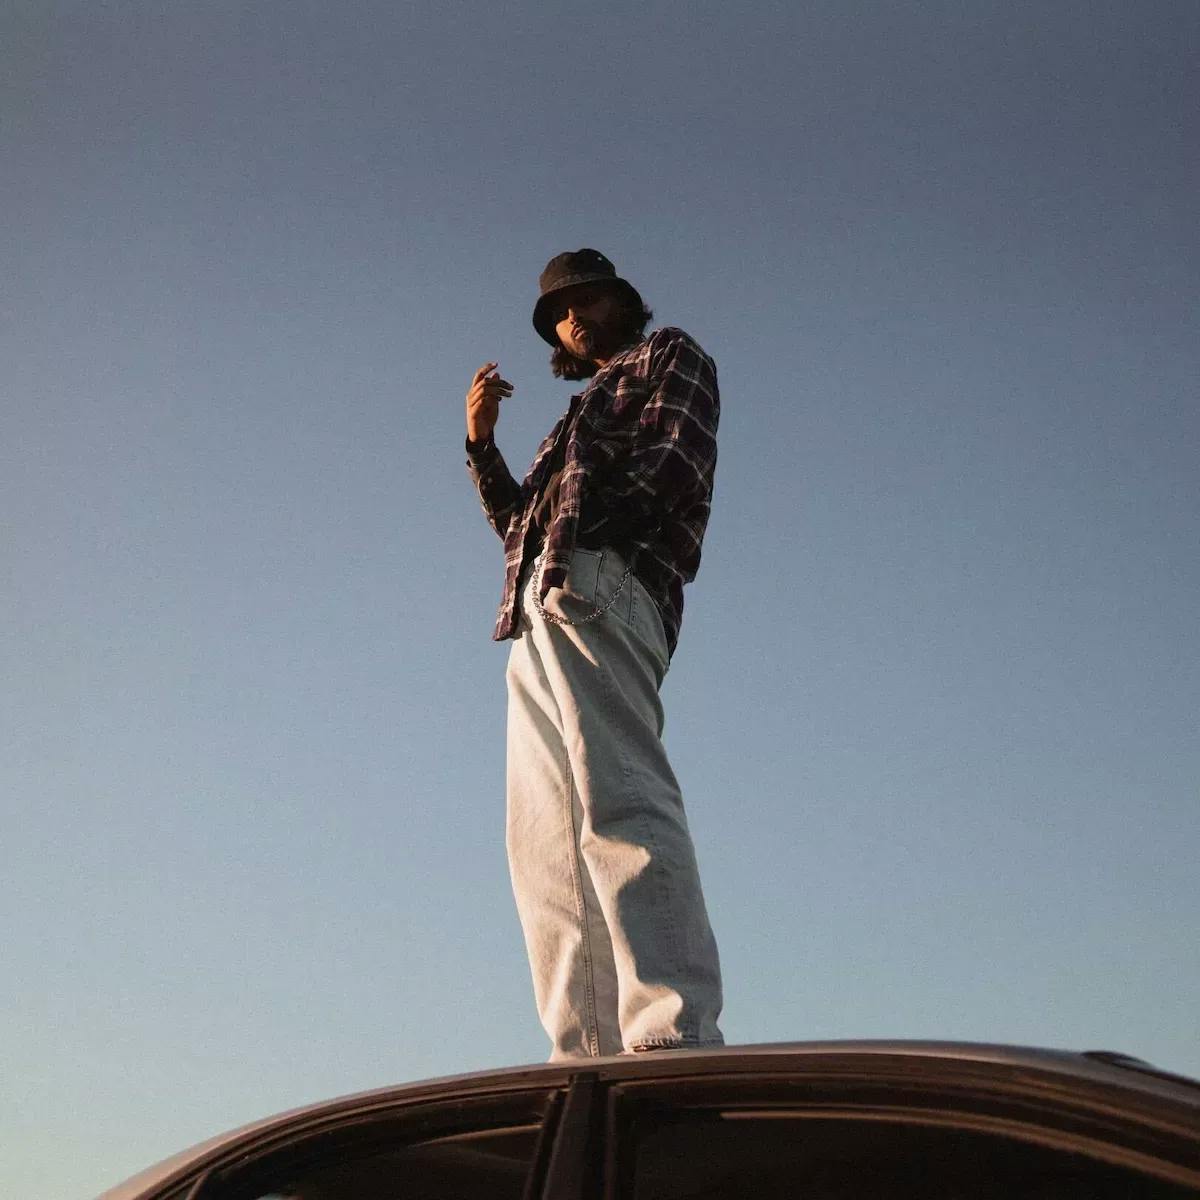 Man standing on the hood of a car